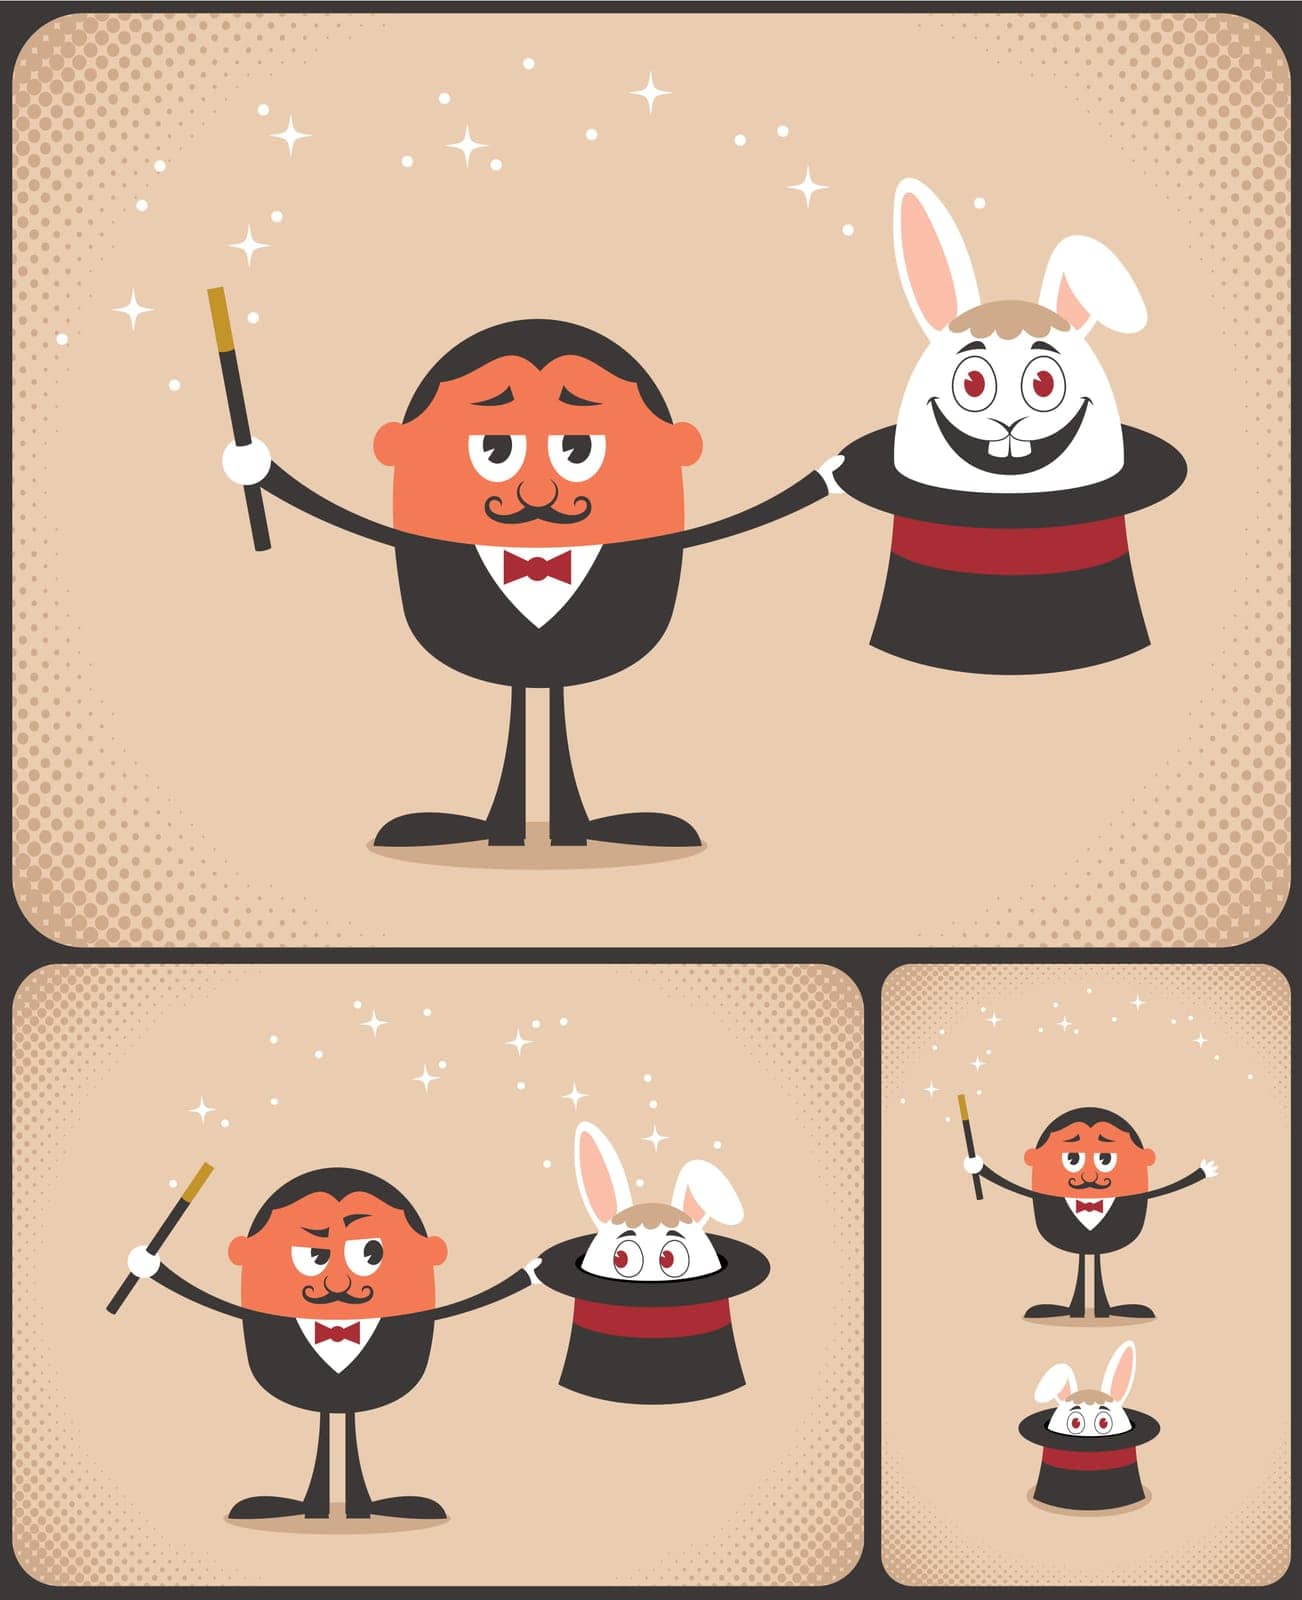 Magician pulls rabbit out of hat. The illustration is in 3 versions. 